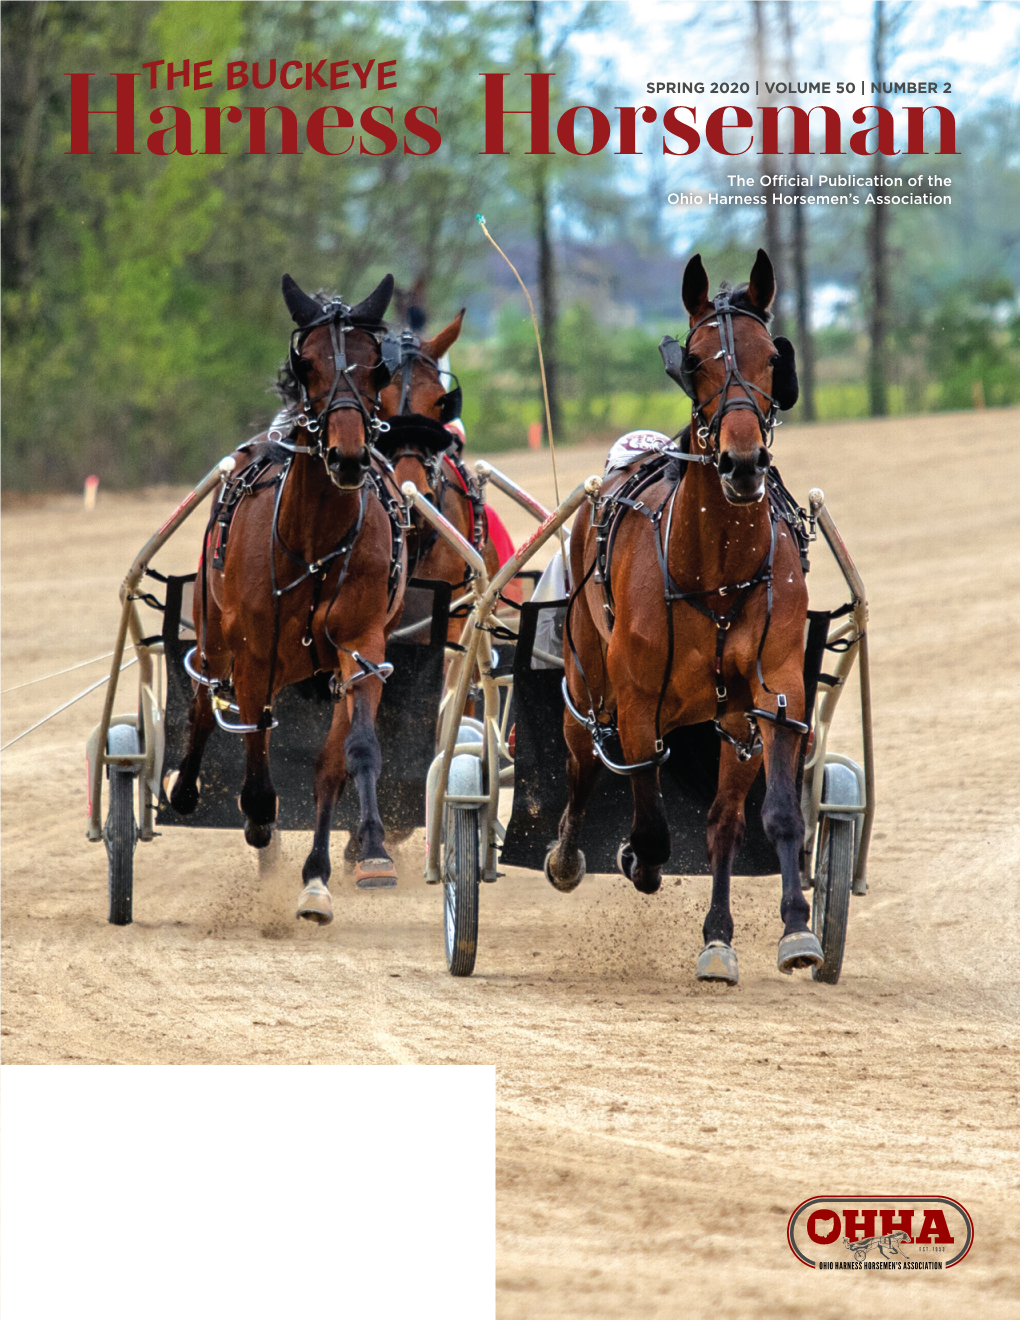 Harness Horseman 120-850 (ISSN 0194-7842) Is Published Four Times Annually by the Ohio Harness Horsemen’S Association, 2237 Sonora Drive, Grove City, OH 43123